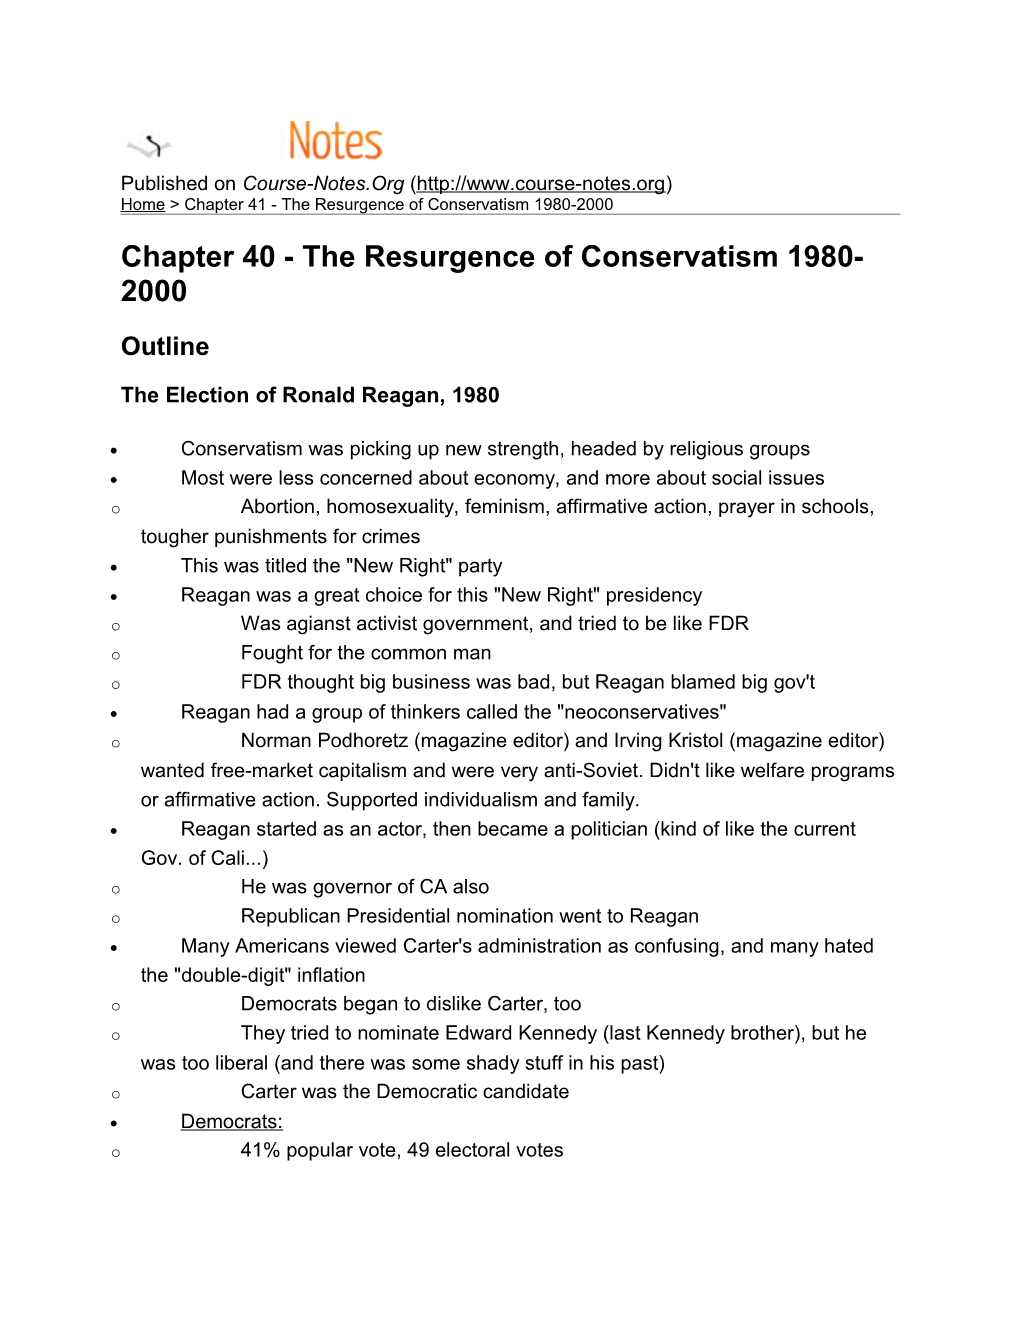 Chapter 40 - the Resurgence of Conservatism 1980-2000